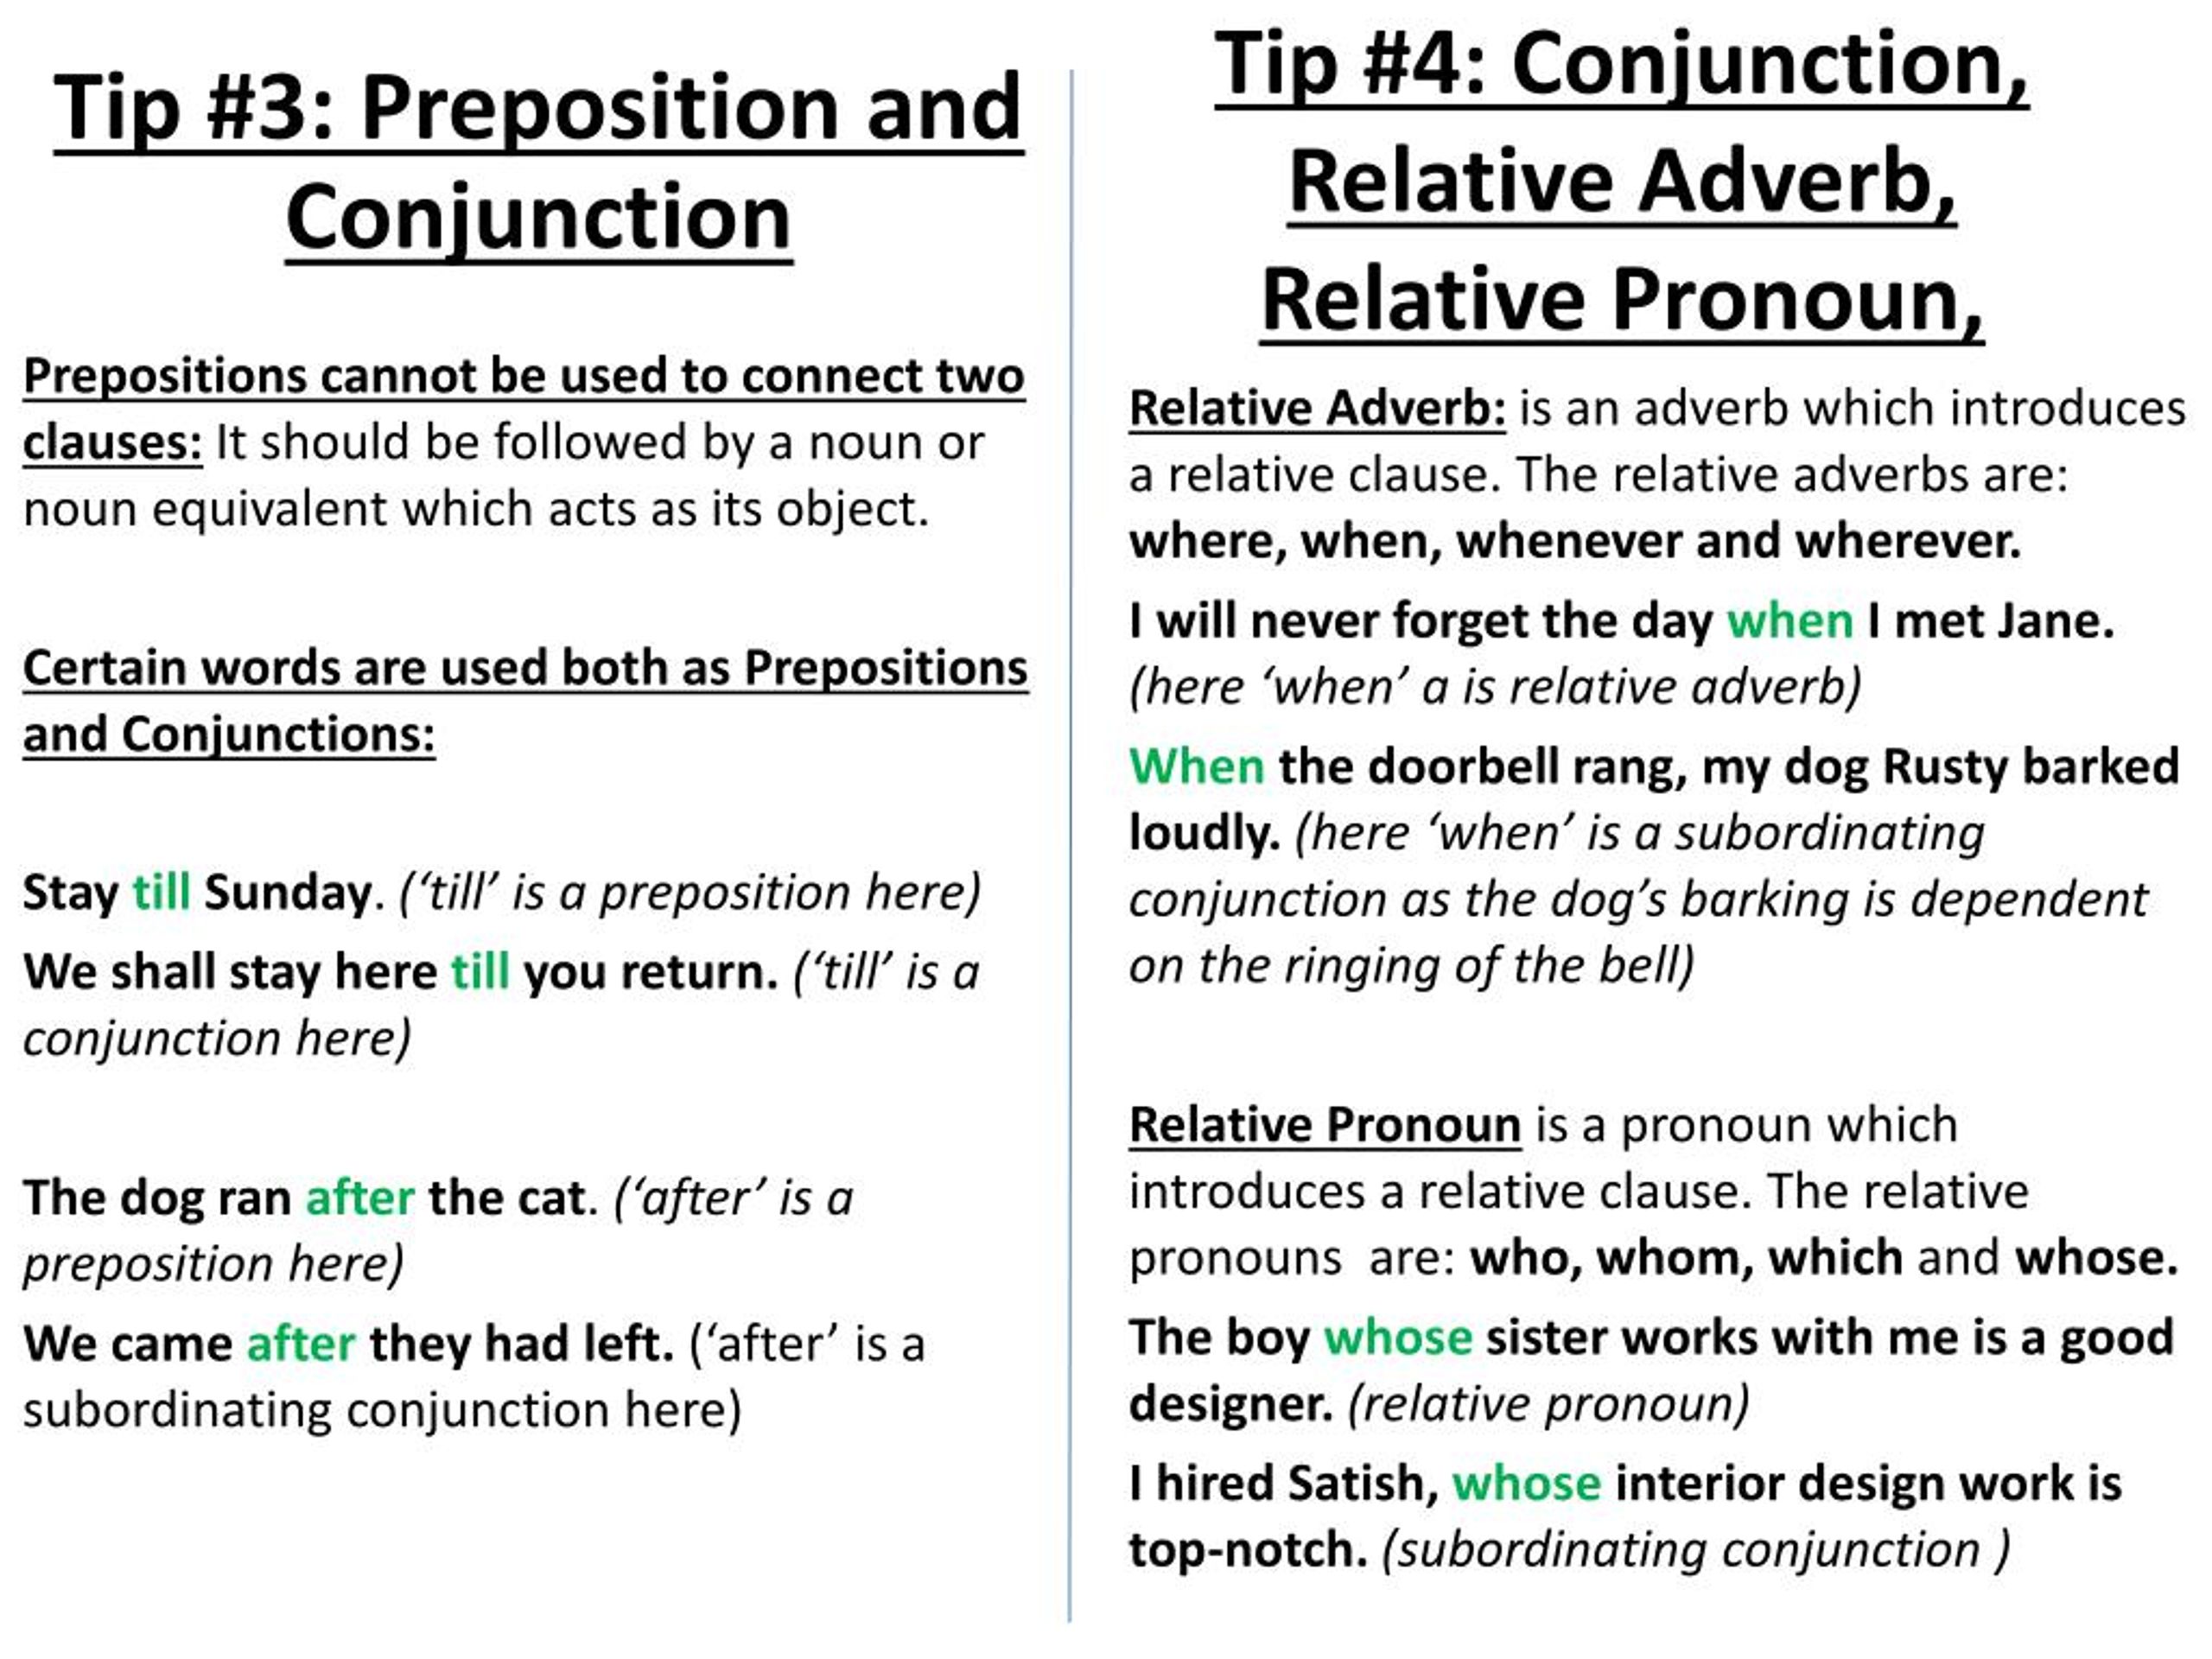 Relative pronouns adverbs who. Relative pronouns and adverbs правило. Conjunction pronouns. Relative pronouns and adverbs презентация. Relative pronouns and adverbs упражнения.